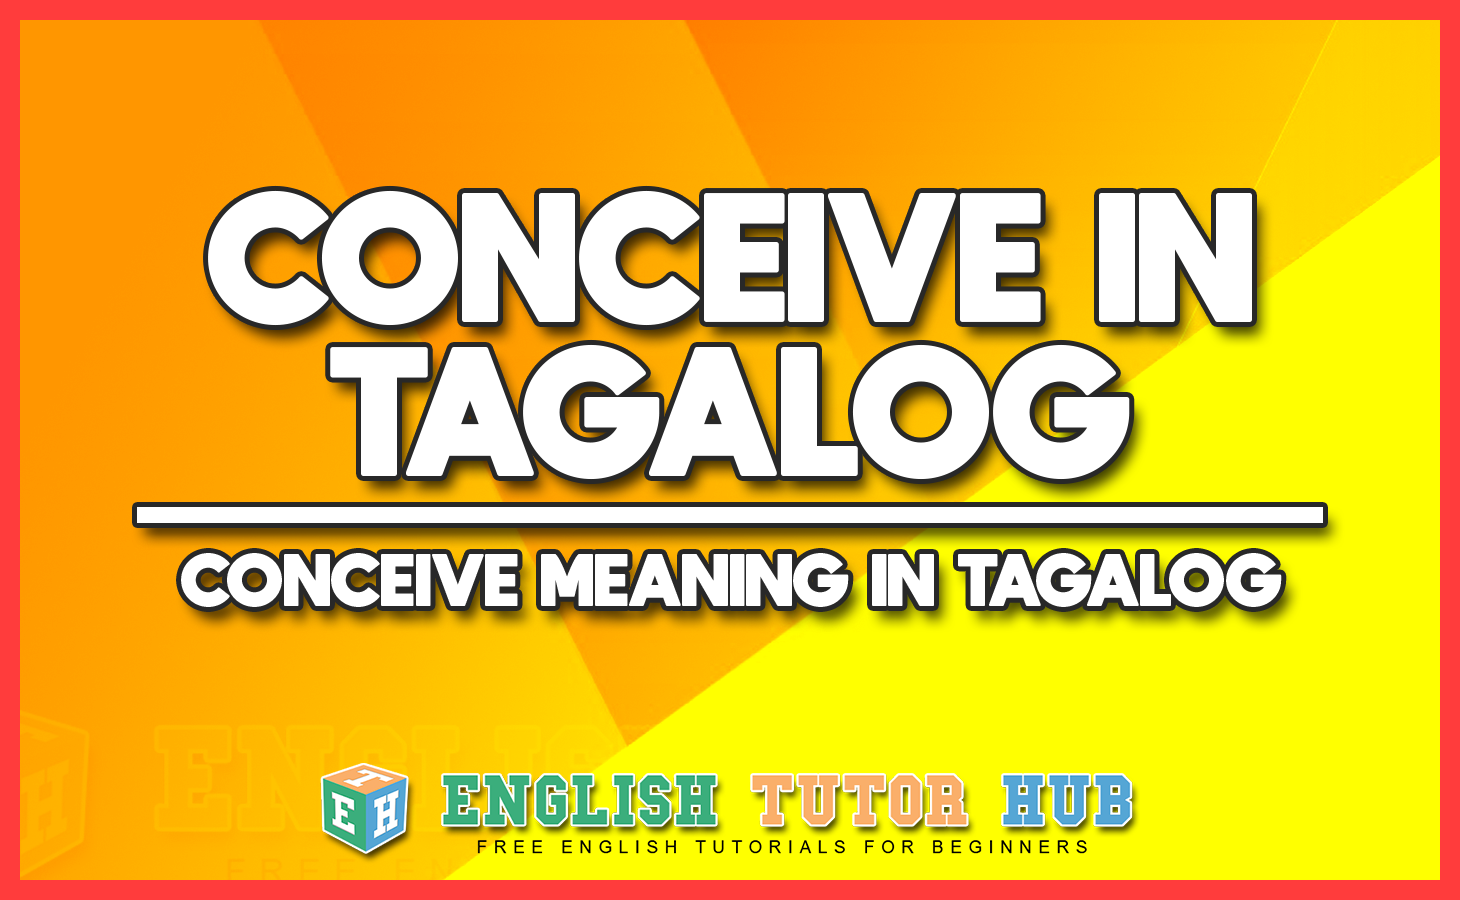 CONCEIVE IN TAGALOG - CONCEIVE MEANING IN TAGALOG